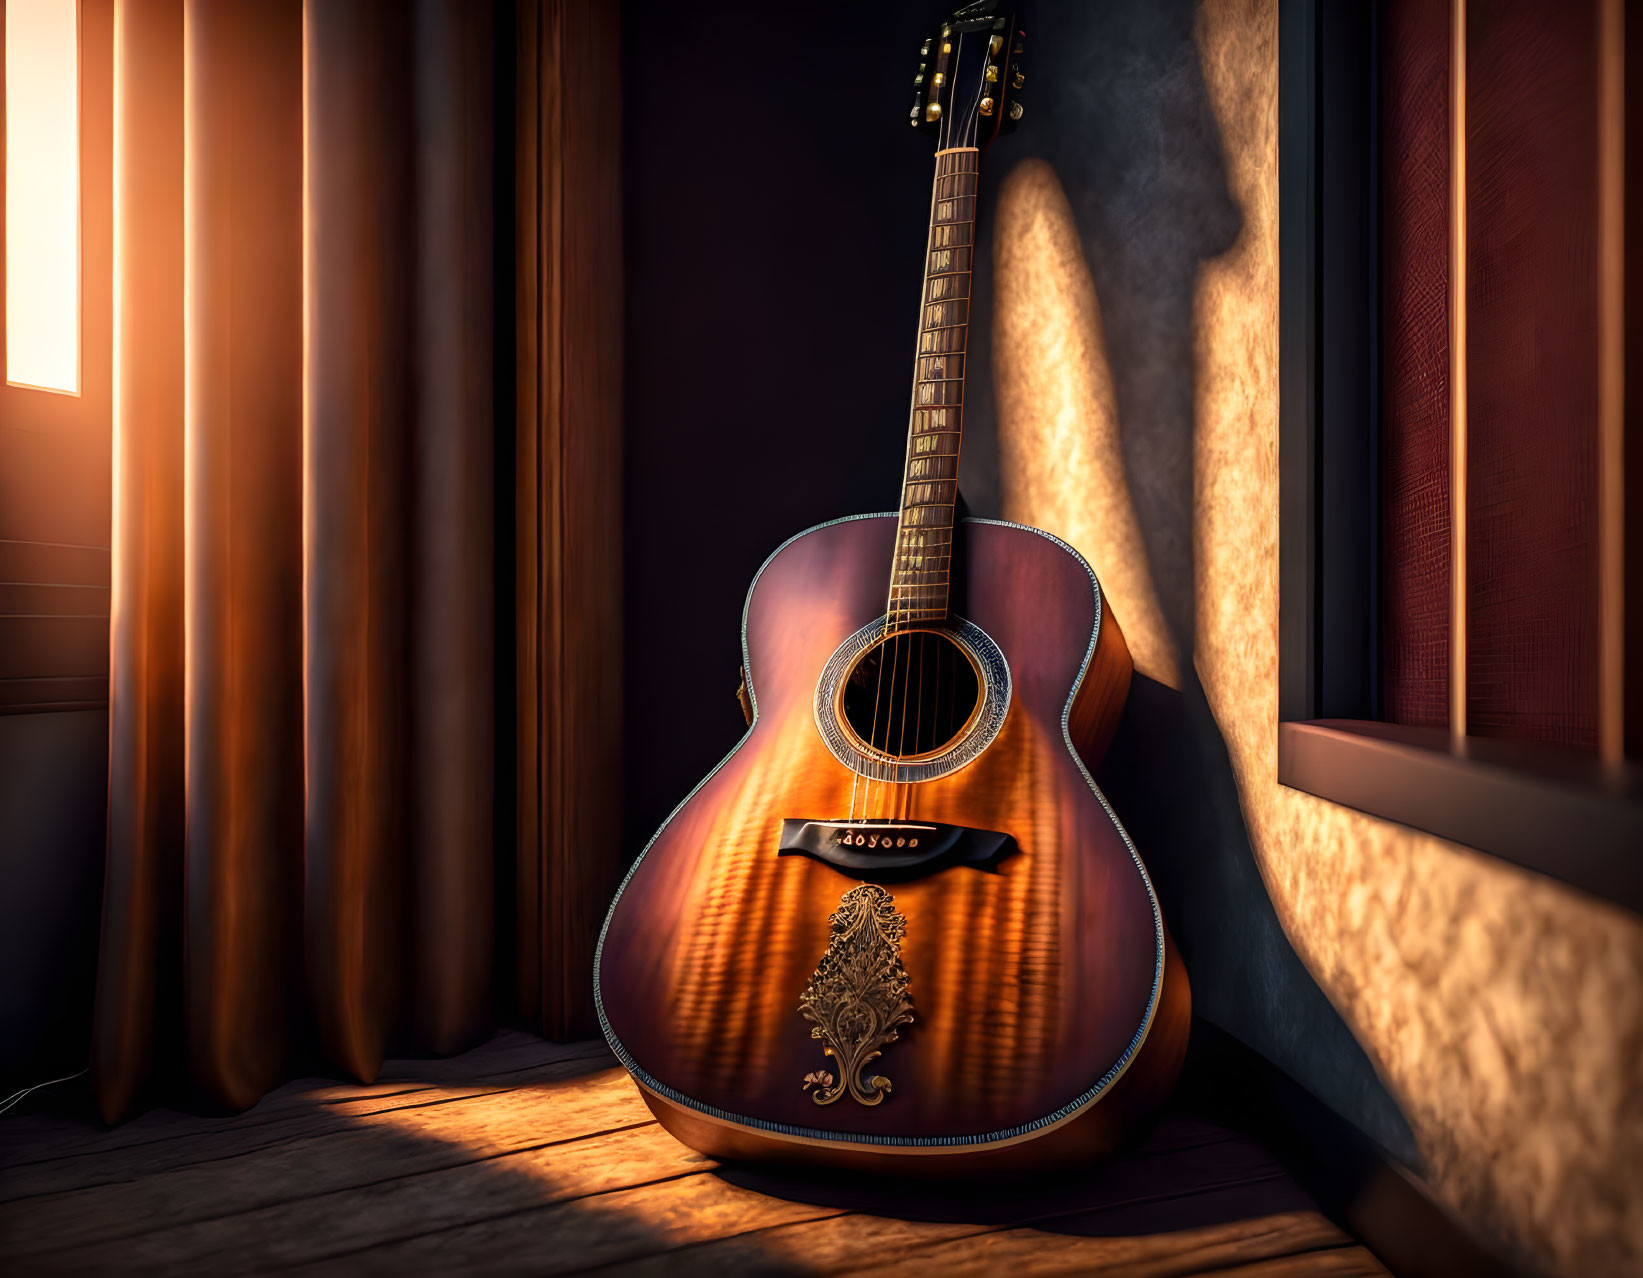 Acoustic guitar by sunlit window with dark curtain